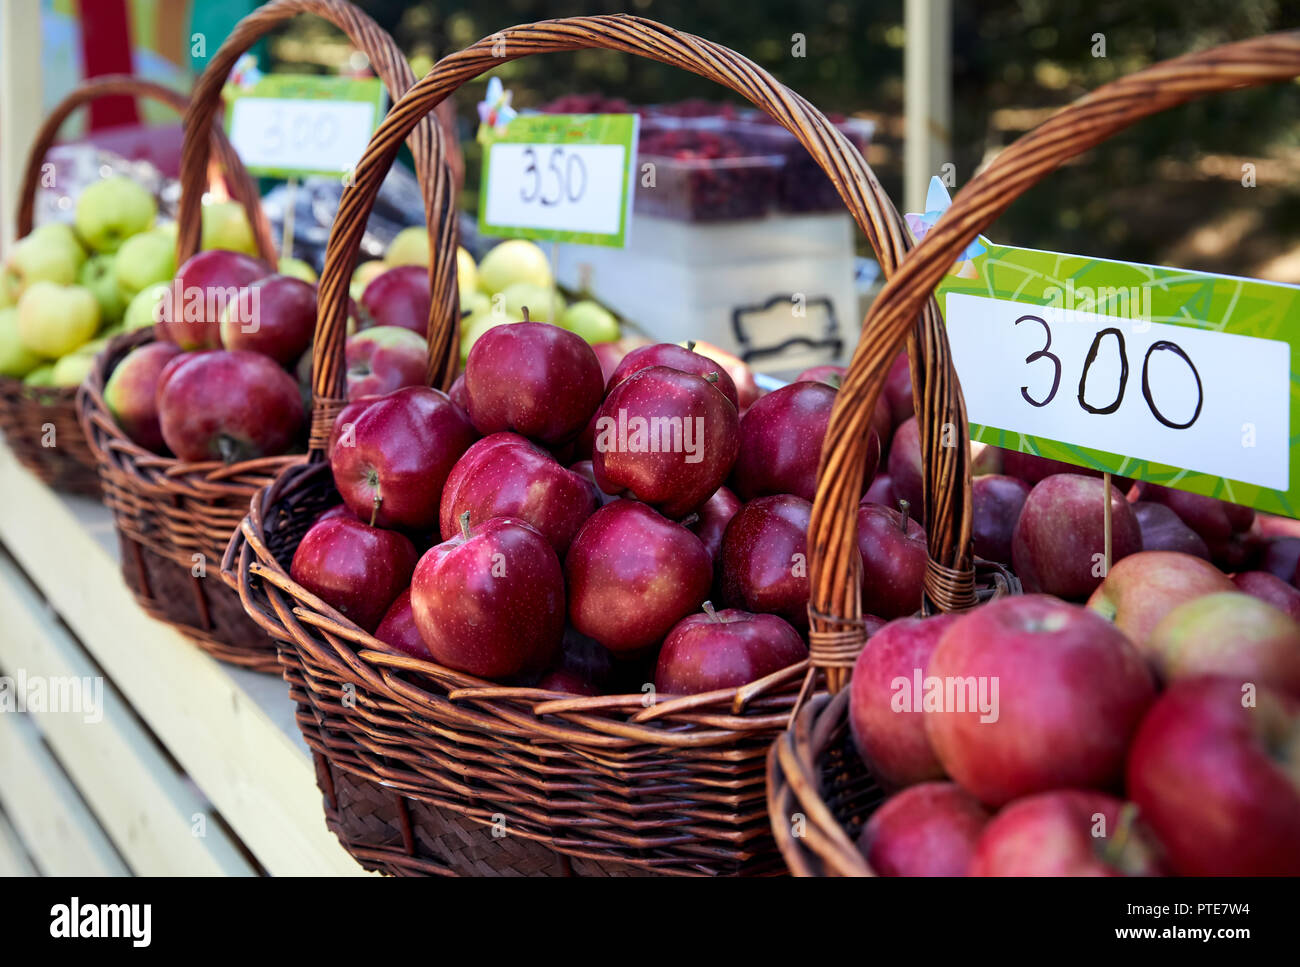 Basket with red apples and price tag on the market in Almaty, Kazakhstan Stock Photo